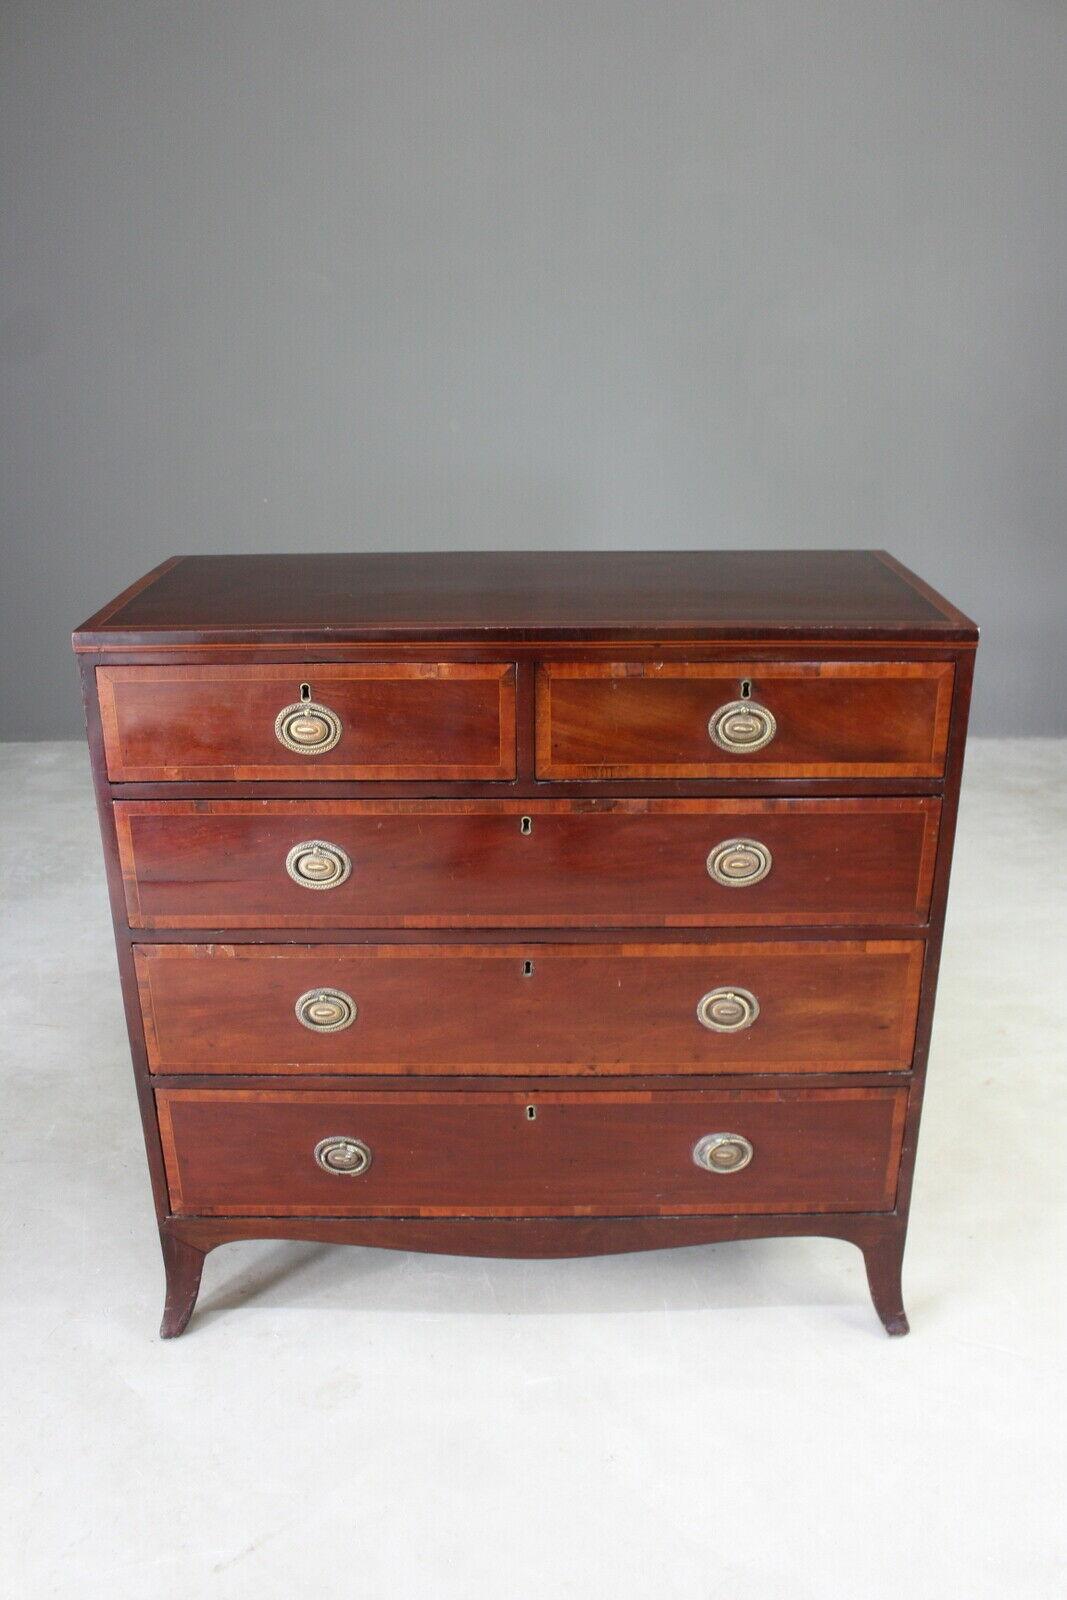 Antique Mahogany Cross Banded Chest of Drawers - Kernow Furniture